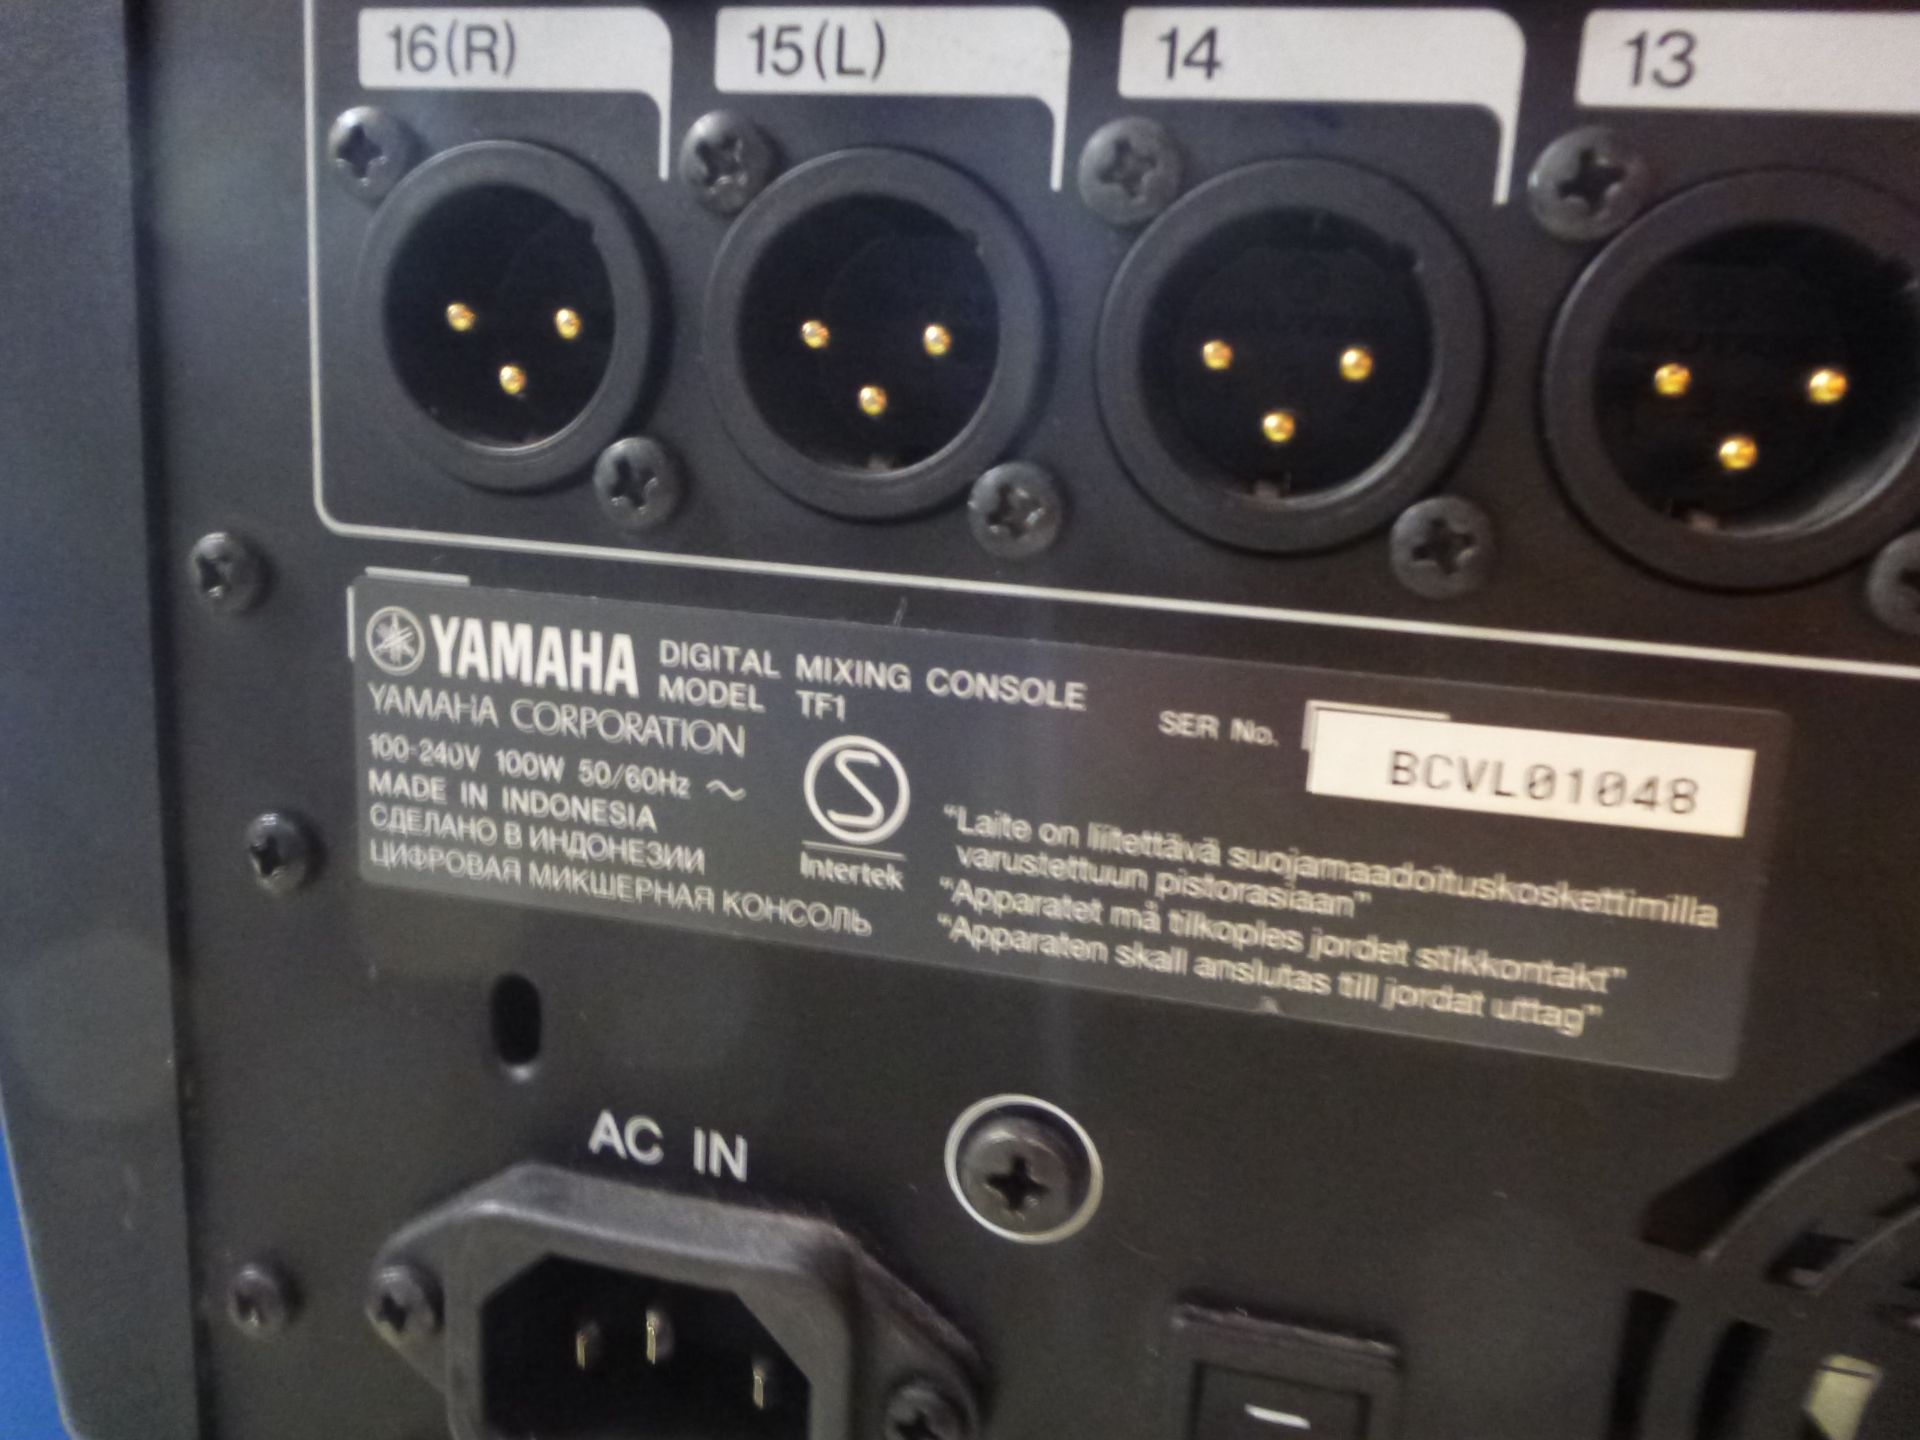 Yamaha TF1 32 Channel Digital Audio Mixing Desk, S/N BCVL01048, In flight case with power supply - Image 6 of 7